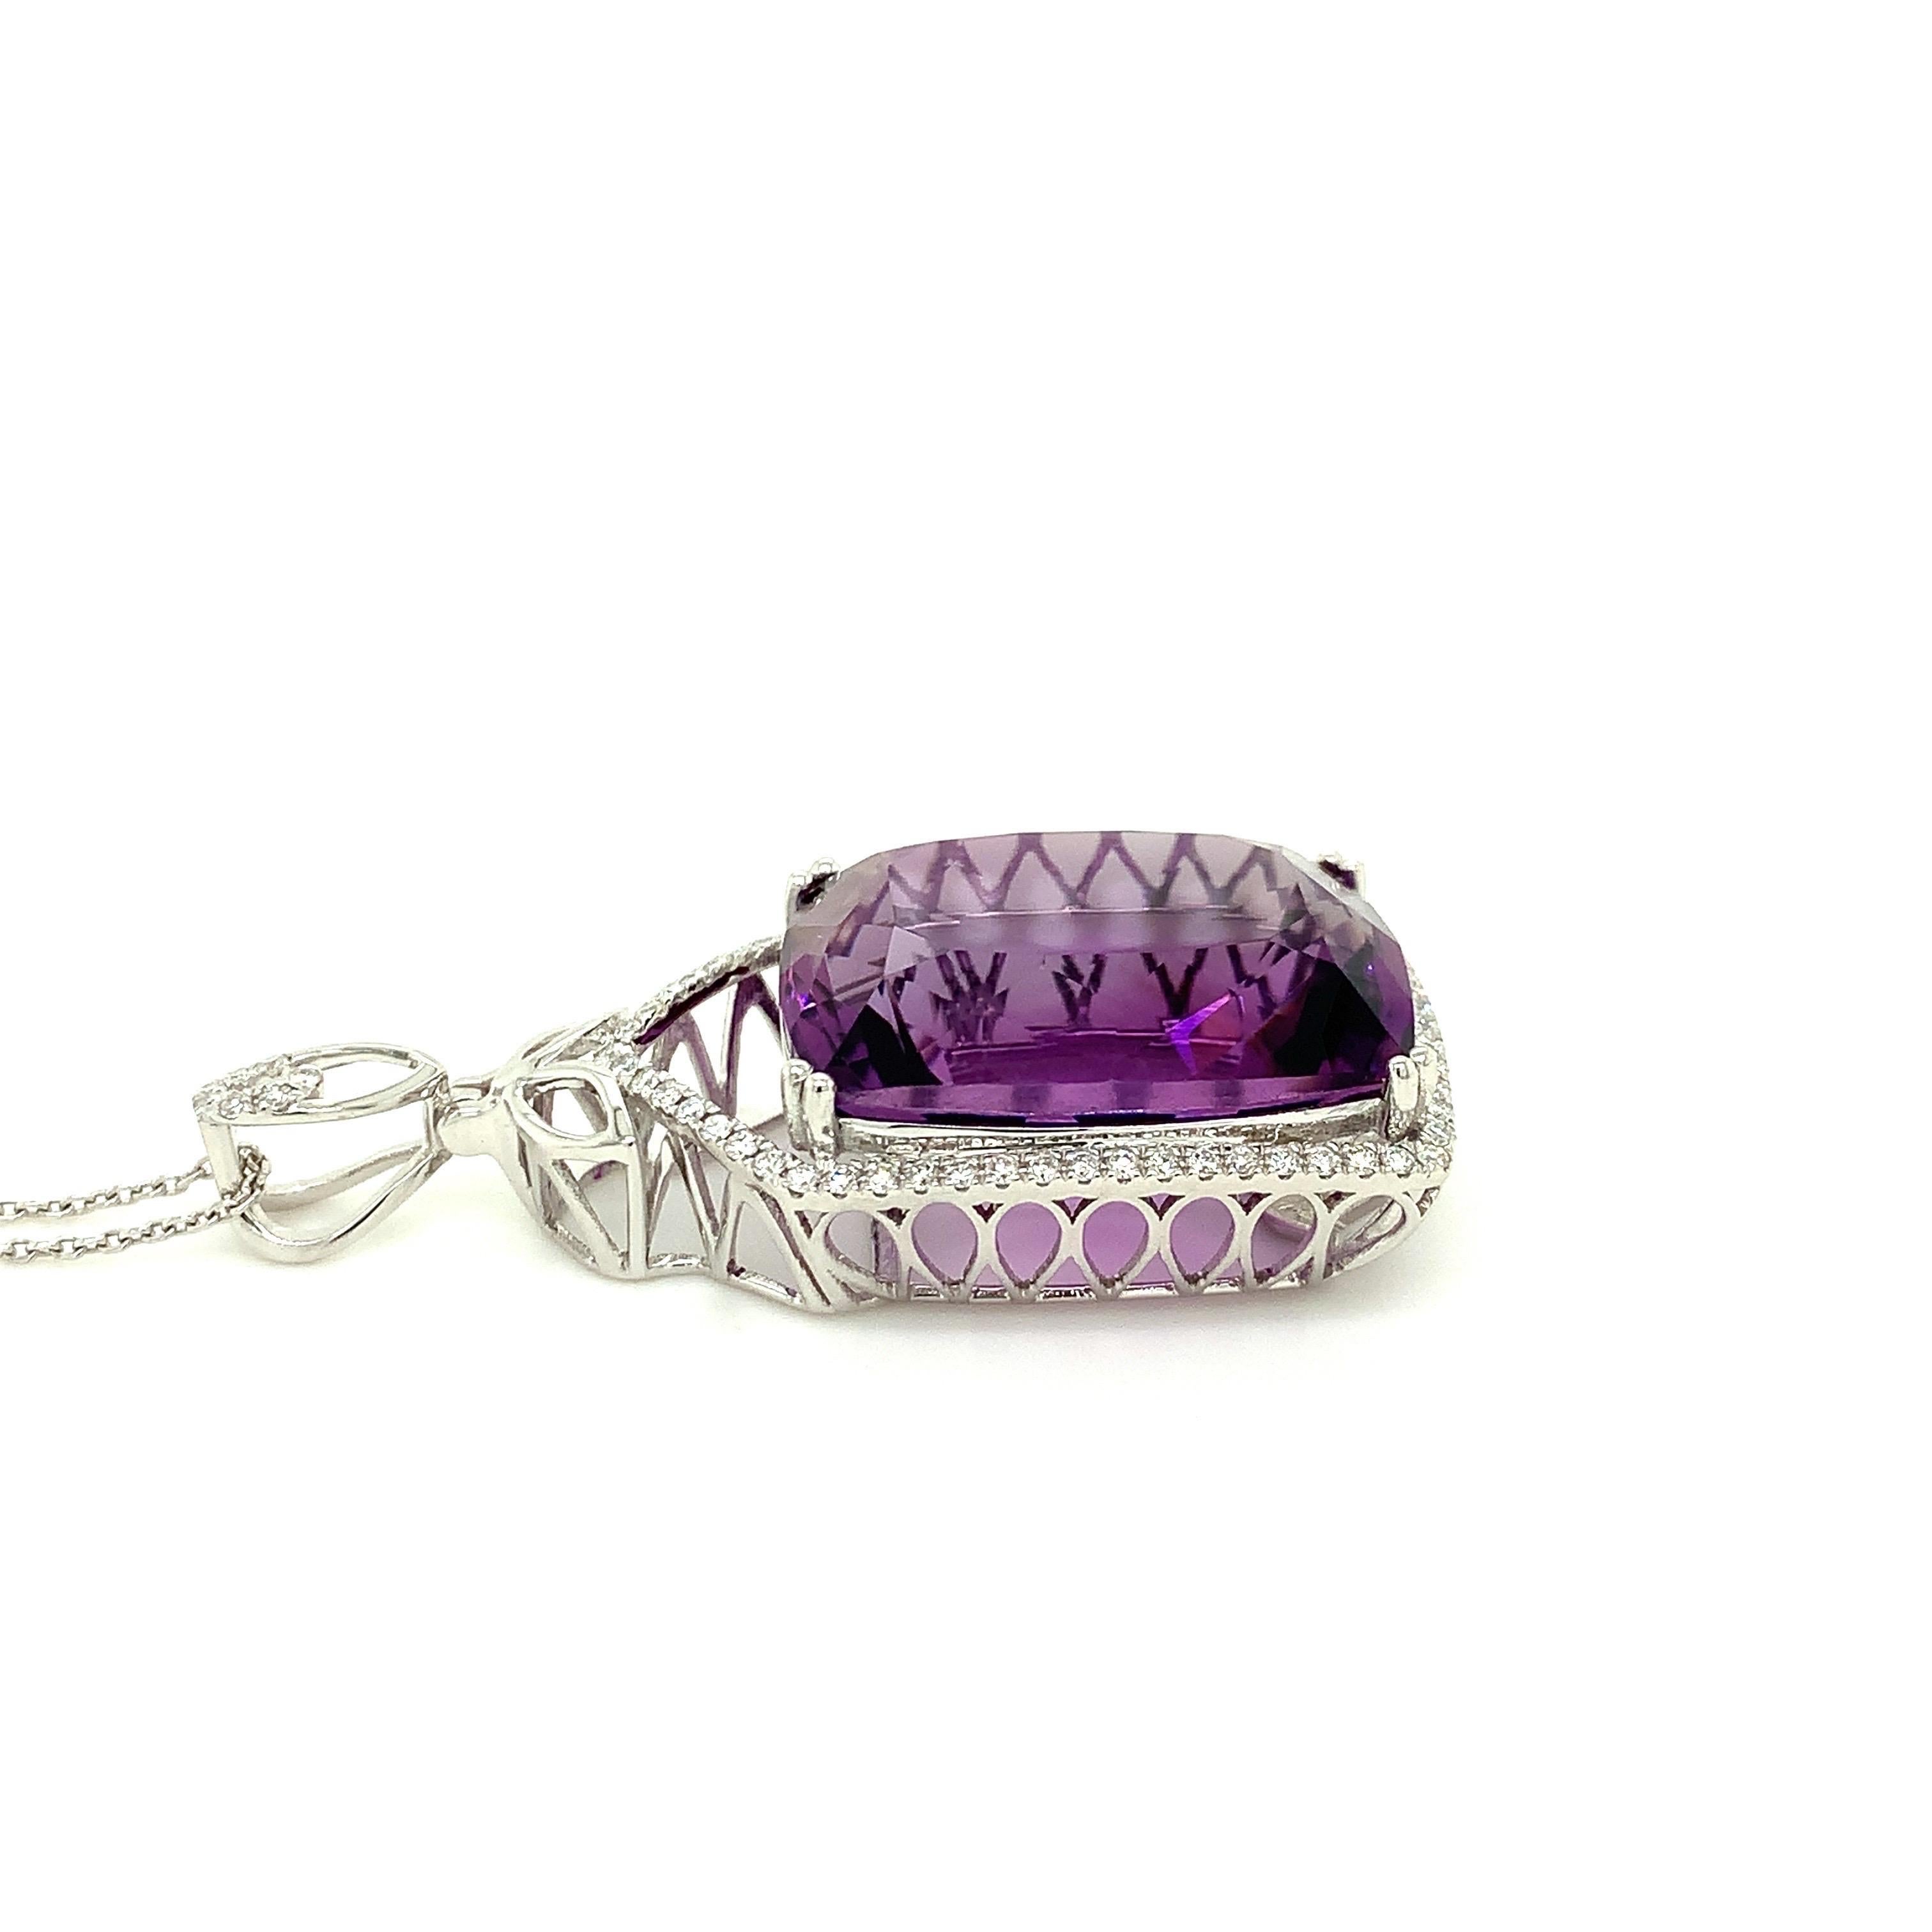 Glamorous pendant. High brilliance, cushion faceted, rich vibrant purple tone natural 28.24 carats amethyst mounted in high profile open basket with eight bead prongs, accented with round brilliant cut diamonds. Handcrafted master piece set in 14